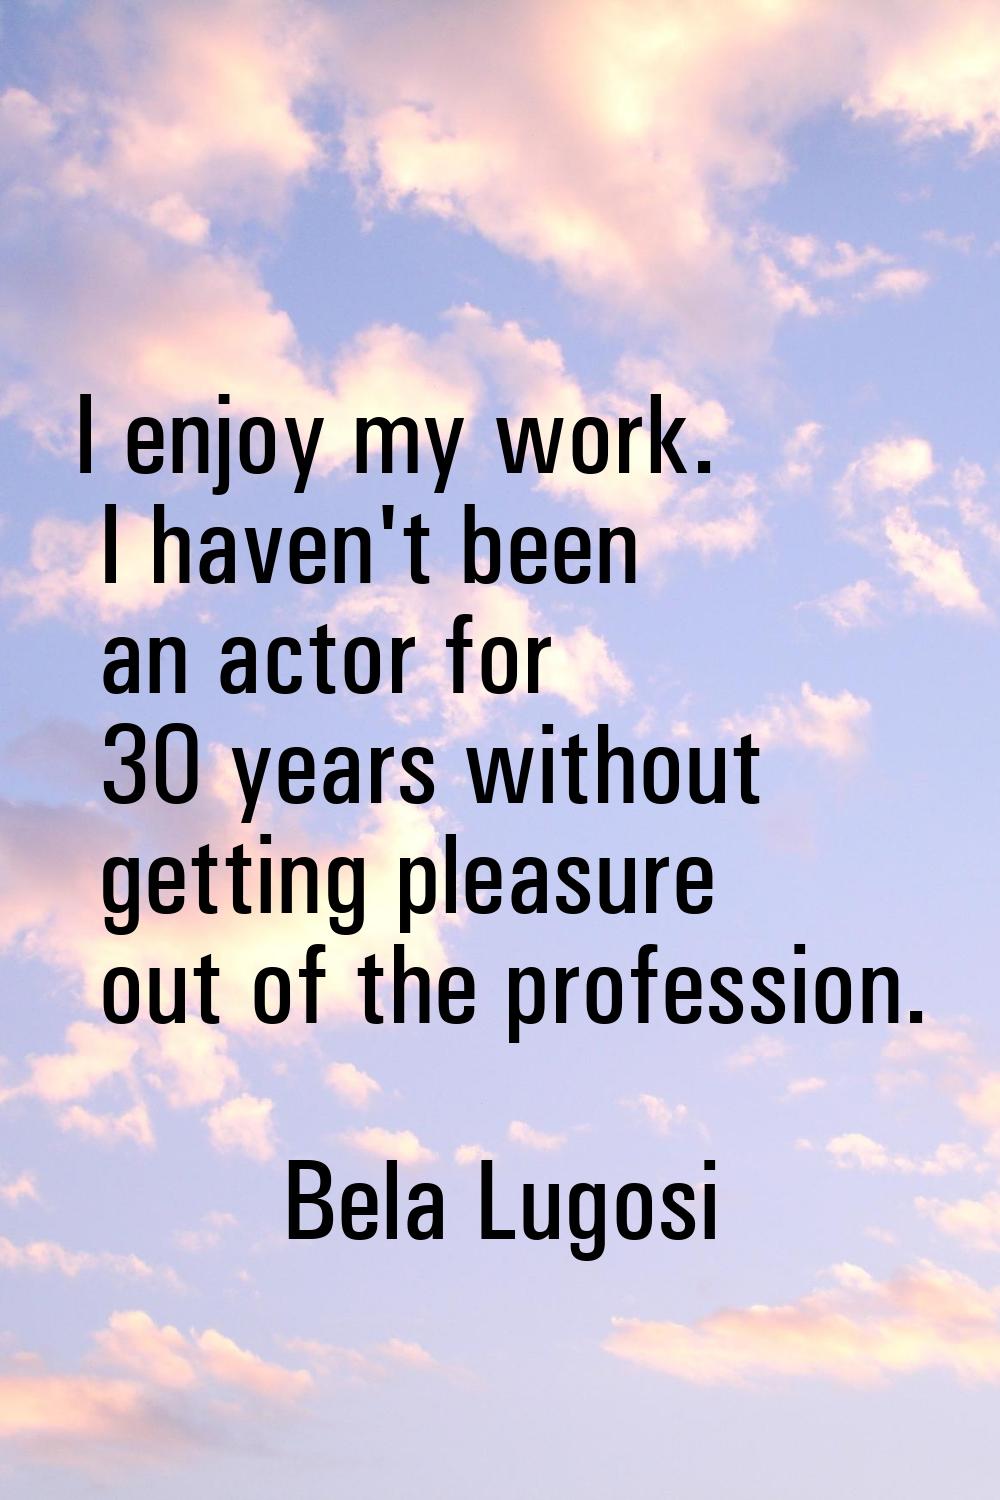 I enjoy my work. I haven't been an actor for 30 years without getting pleasure out of the professio